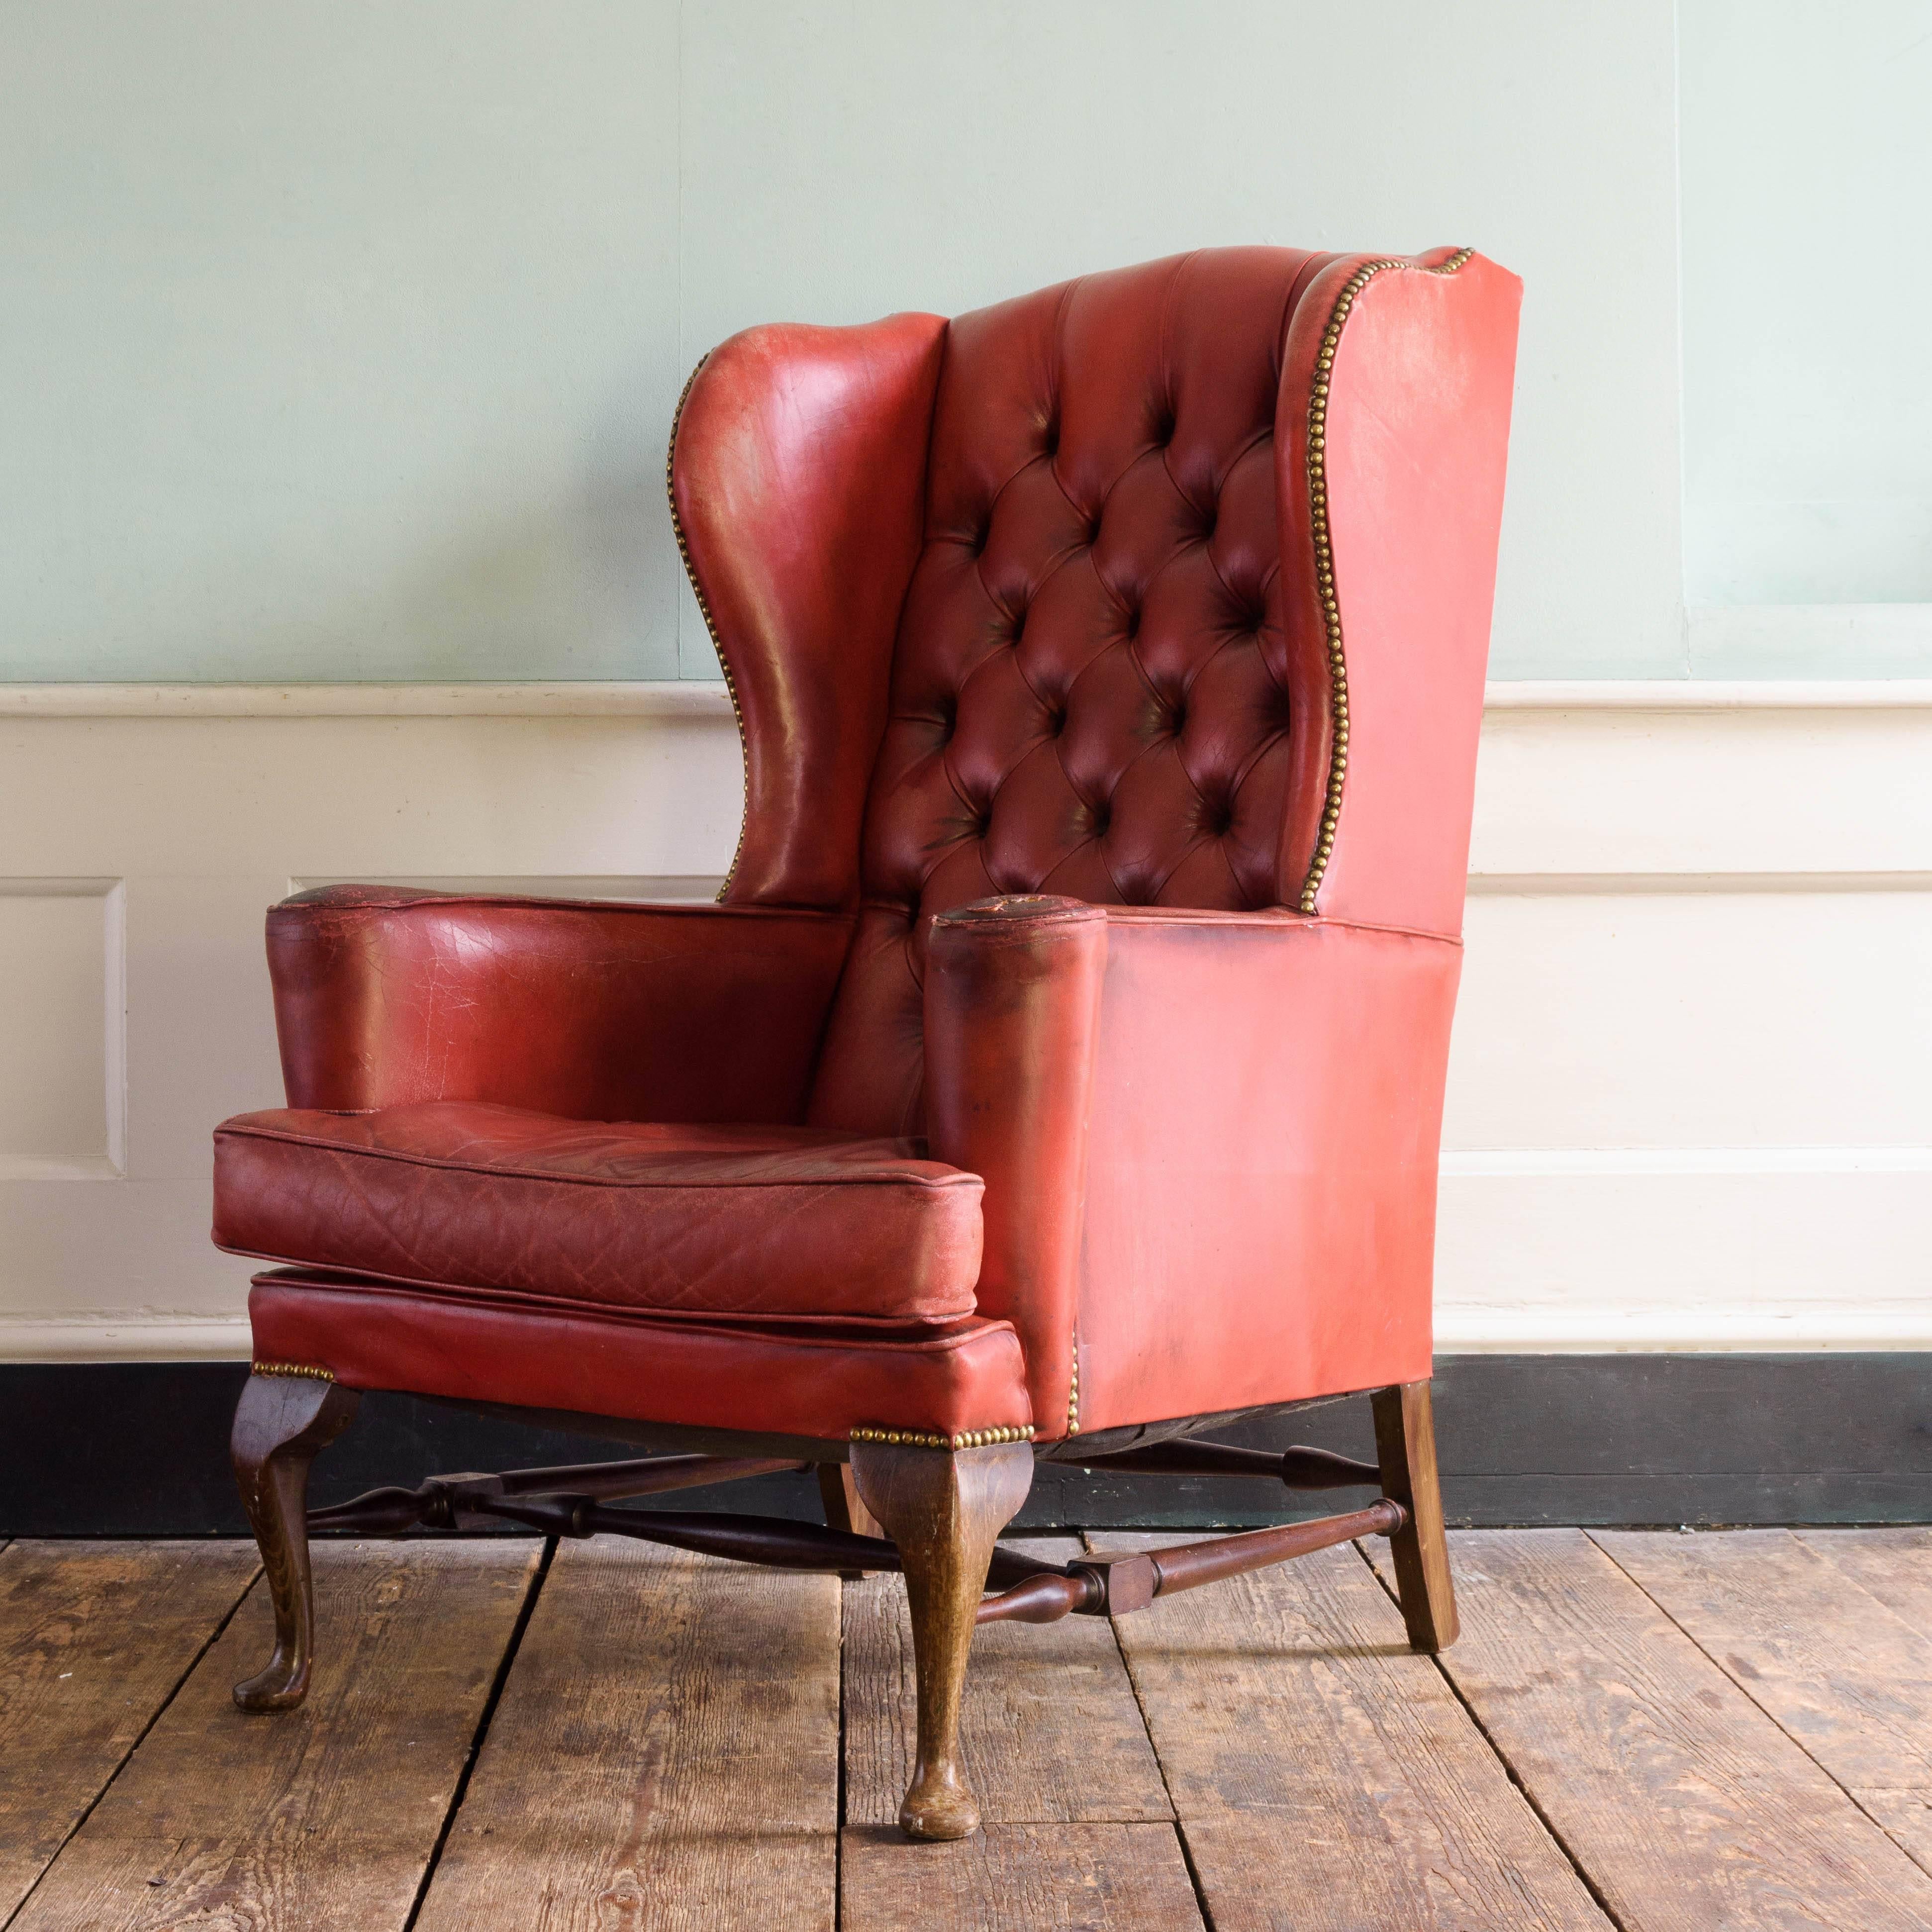 Pair of red leather wingback armchairs, with buttoned upholstery to the back and squab cushion, on cabriole legs.

Dimensions: 116cm (45¾") high, 80cm (31½") wide, 94cm (37") deep.